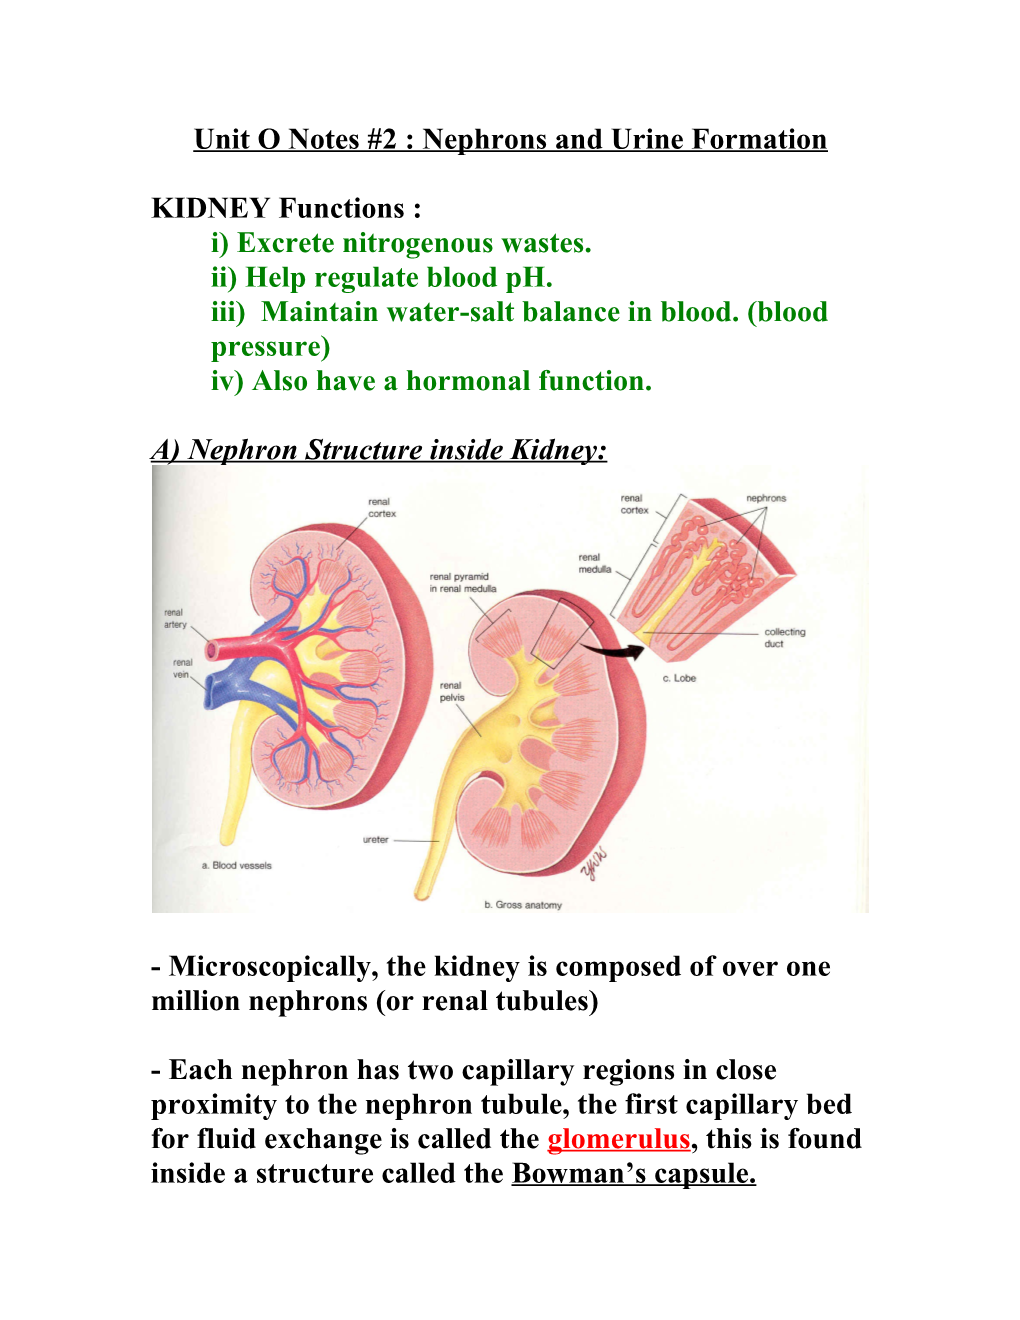 Unit O Notes #2 : Nephrons and Urine Formation